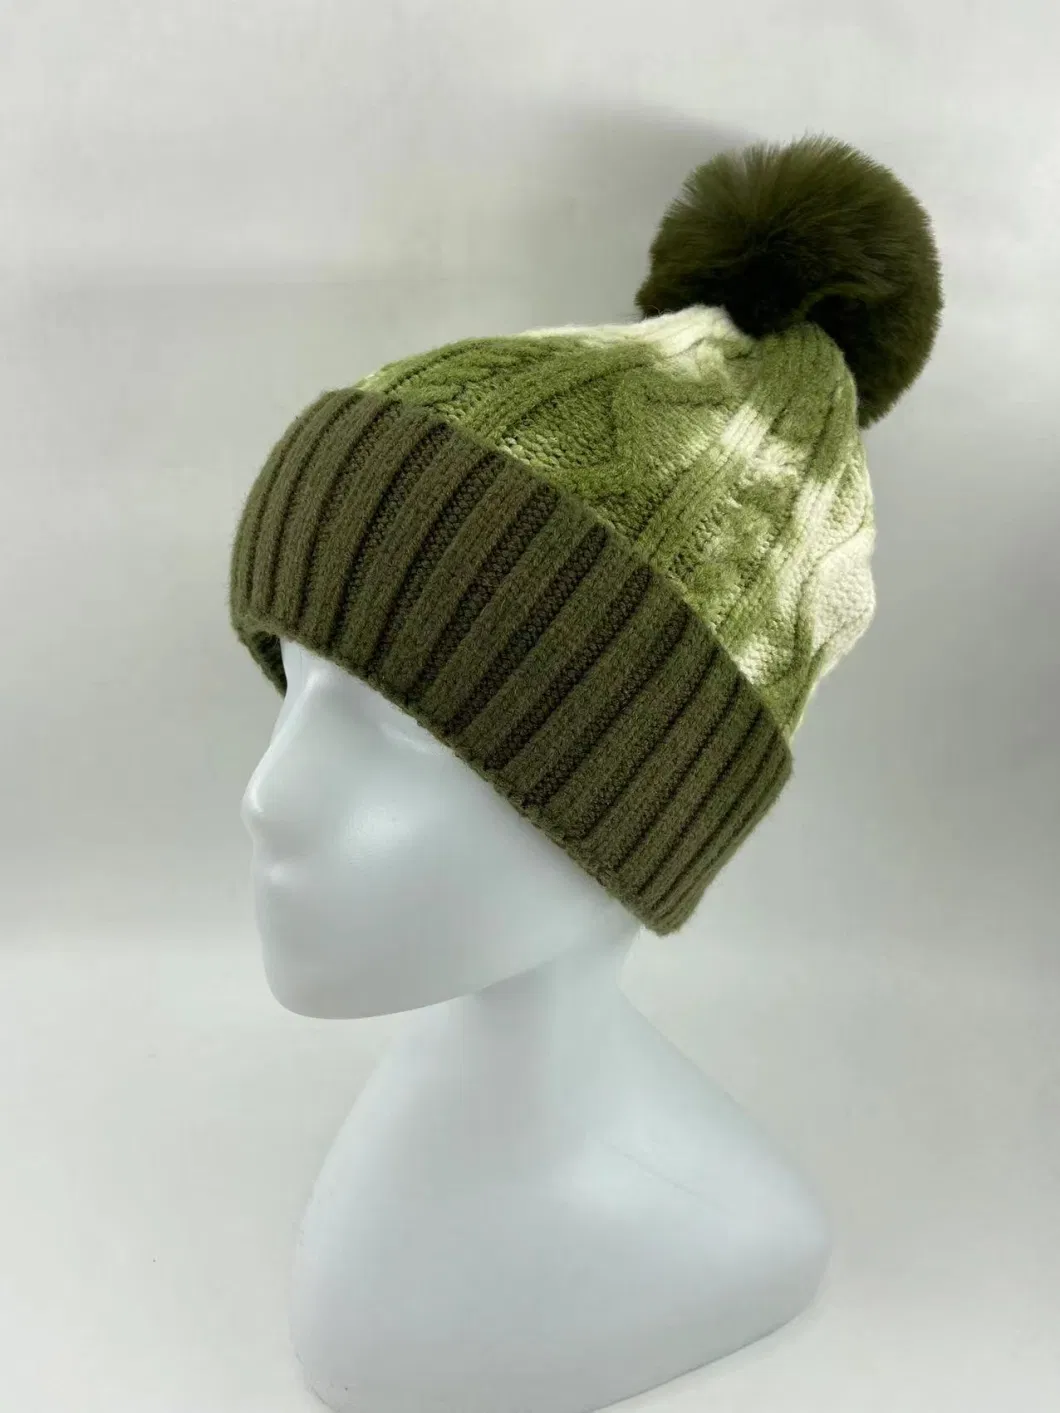 Tie Dying Knitted Beanie Hat with Fake Fur Pompon